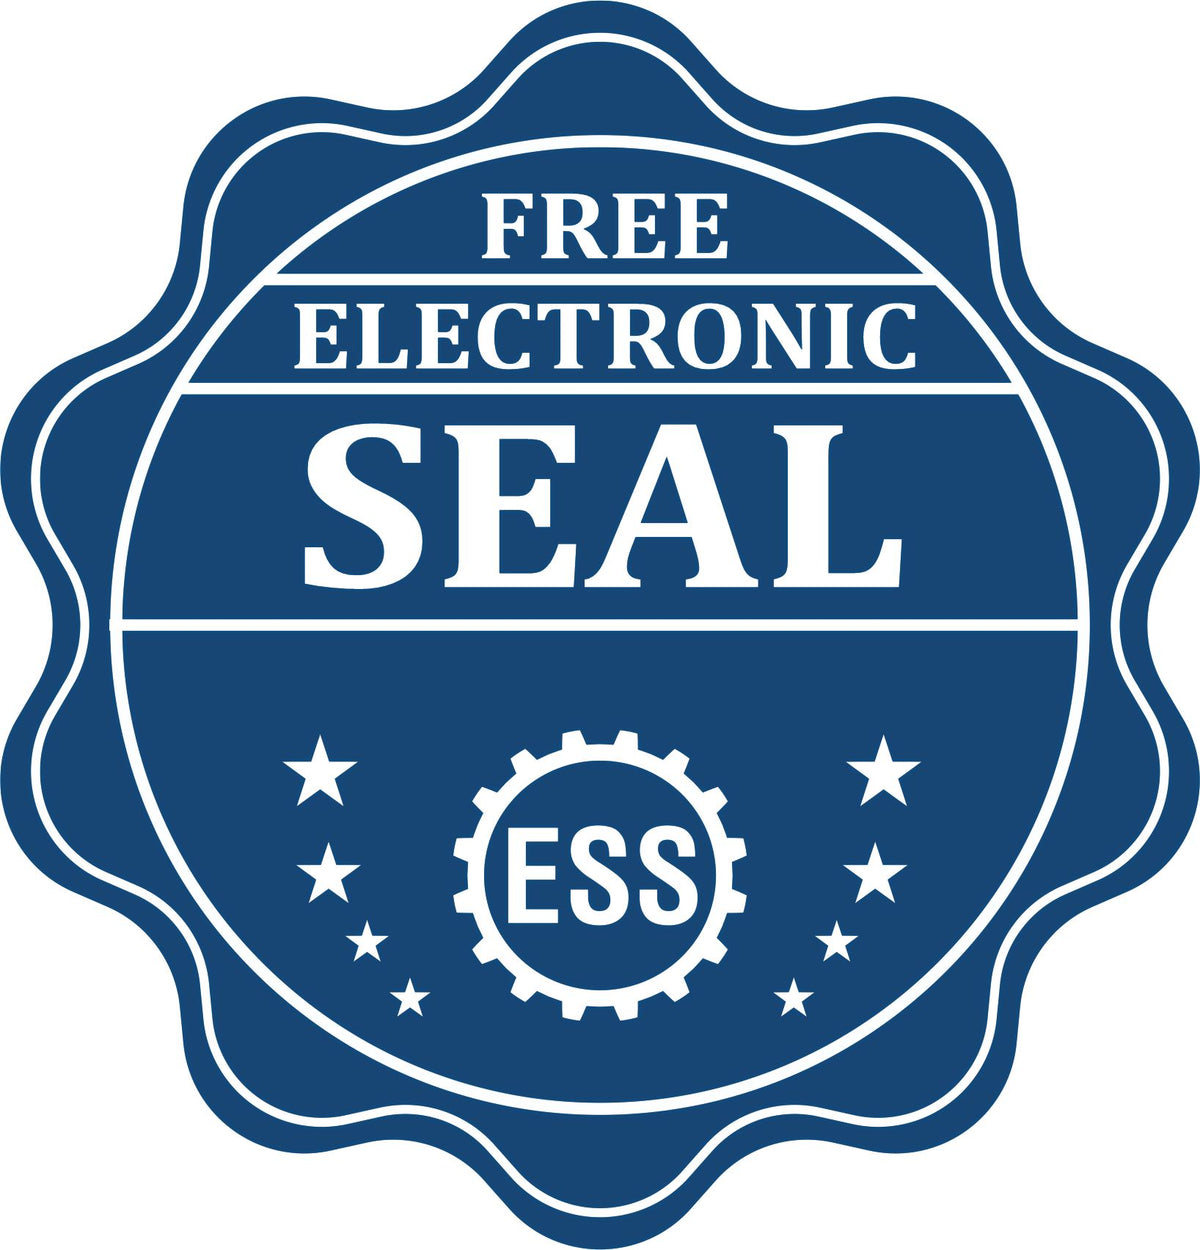 A badge showing a free electronic seal for the Handheld Pennsylvania Professional Engineer Embosser with stars and the ESS gear on the emblem.